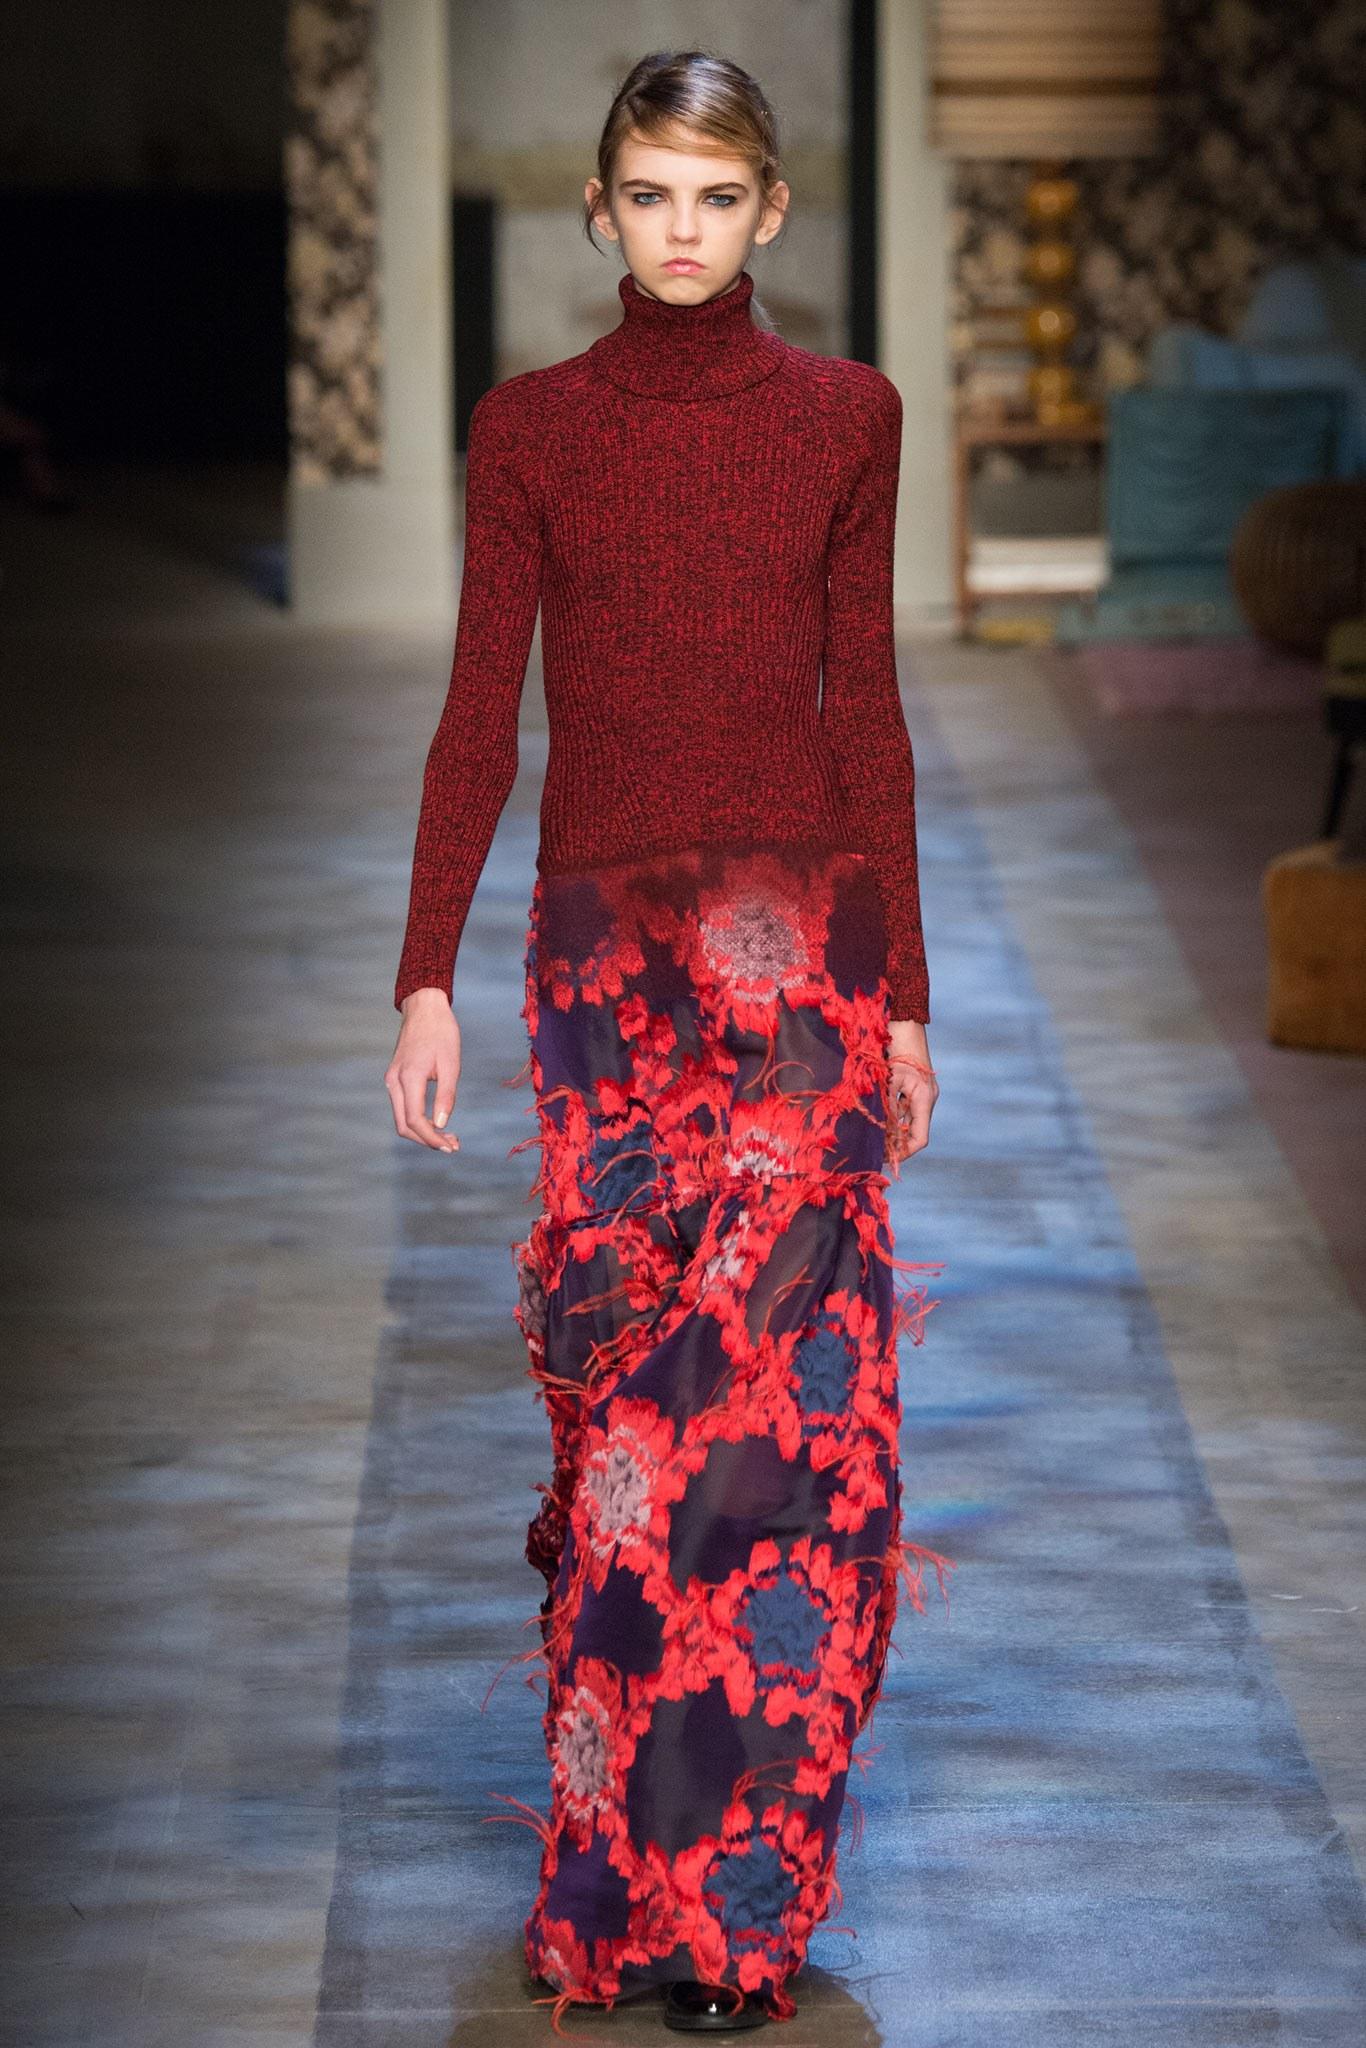 This fabulous ERDEM evening gown features a red and black heathered knit turtleneck top, felted mid section, and eggplant purple organza mermaid skirt with red ostrich feather accents. Care tags removed. as-is. Worn once. no signs of wear.
Excellent